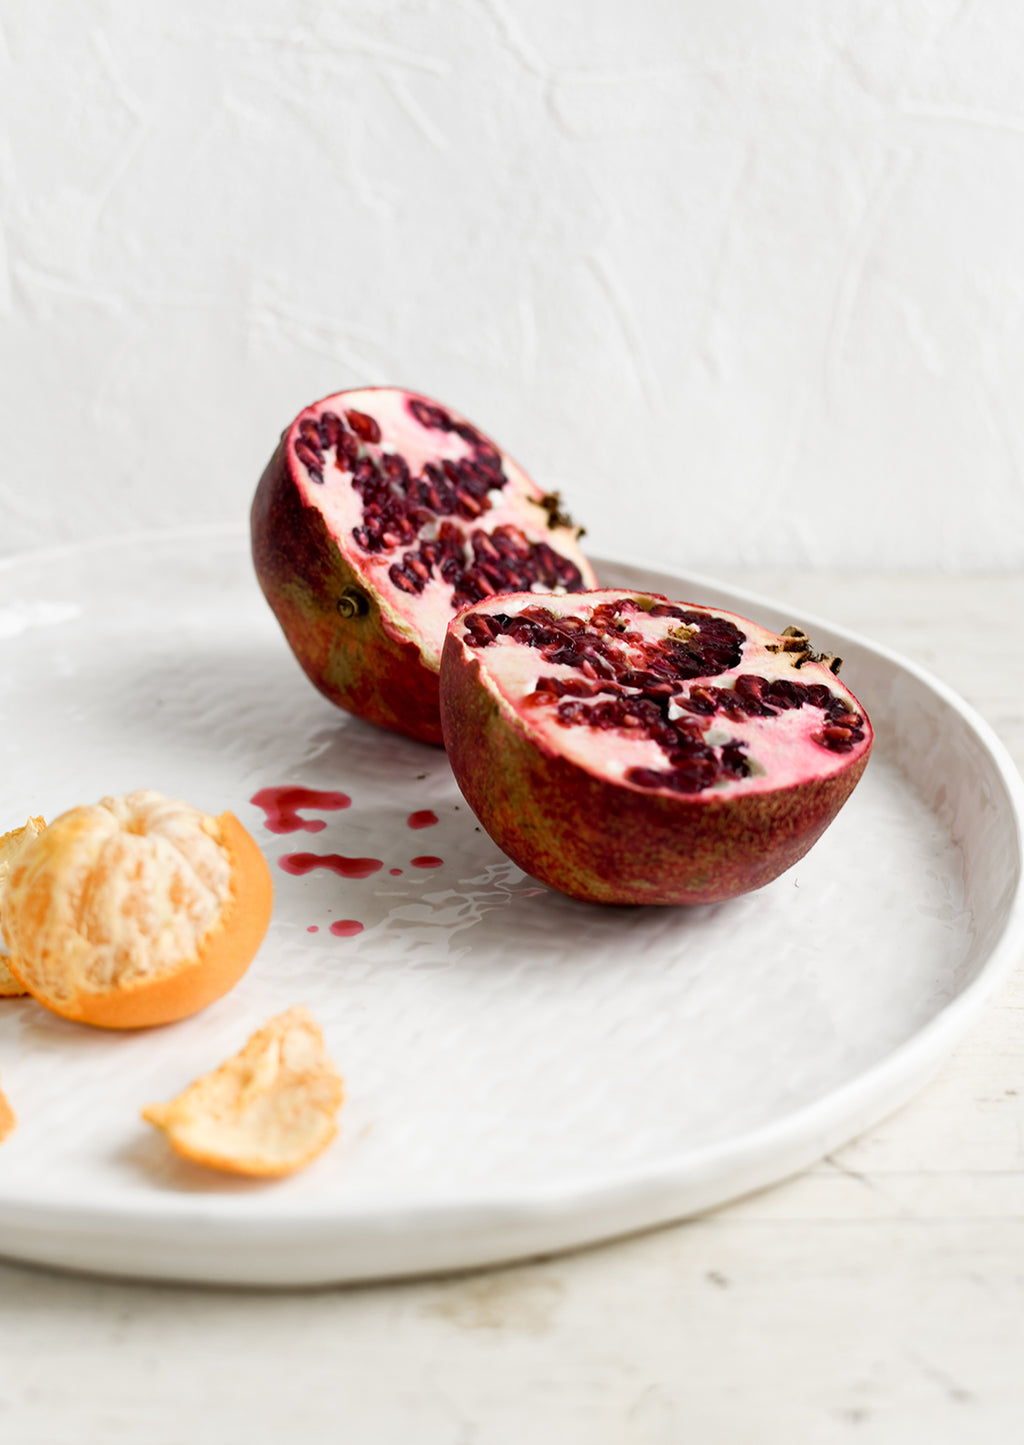 2: A round white ceramic tray with basketweave texture, styled with a pomegranate.